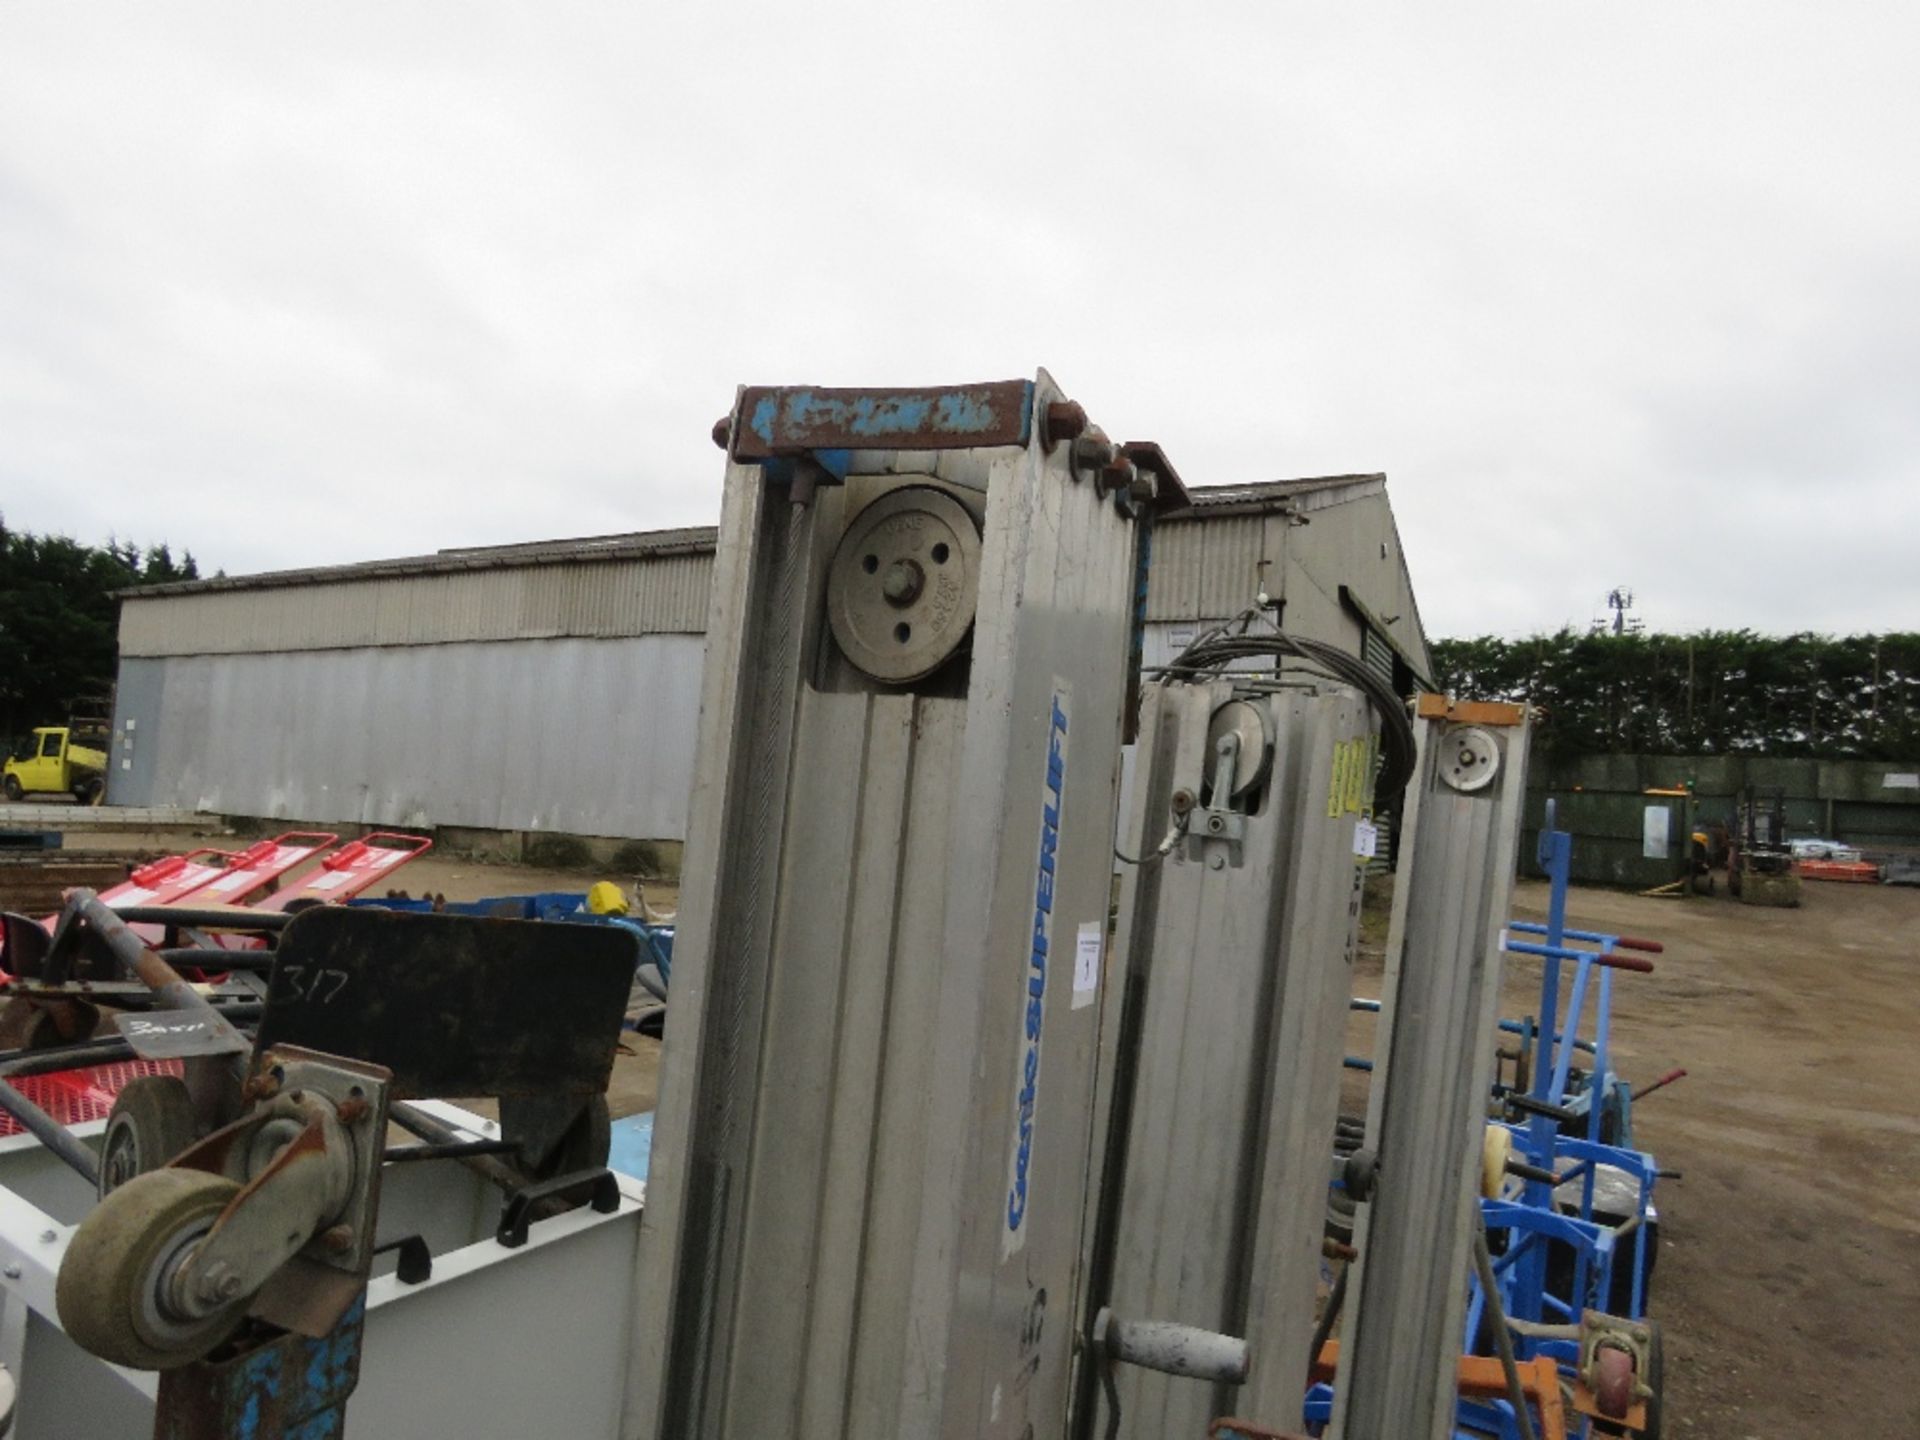 GENIE SL20 MANUAL OPERATED MATERIAL LIFT UNIT. WITH FORKS. DIRECT FROM LOCAL COMPANY. - Image 5 of 5